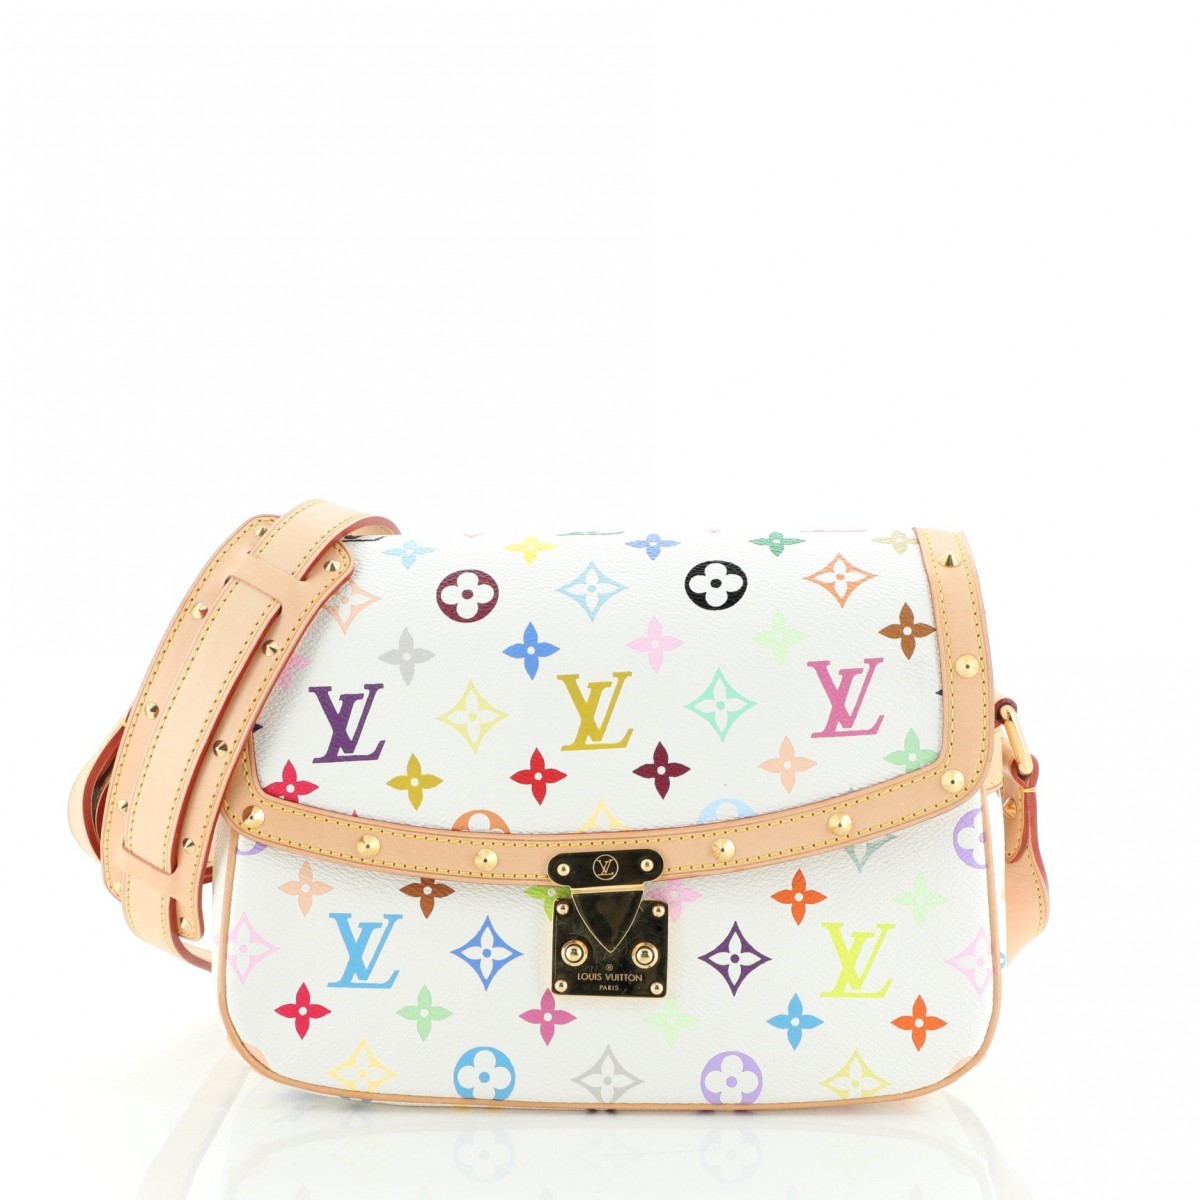 How can I buy a Louis Vuitton bag multicolor replica from China?(2022)-Best Quality Fake Louis Vuitton Bag Online Store, Replica designer bag ru